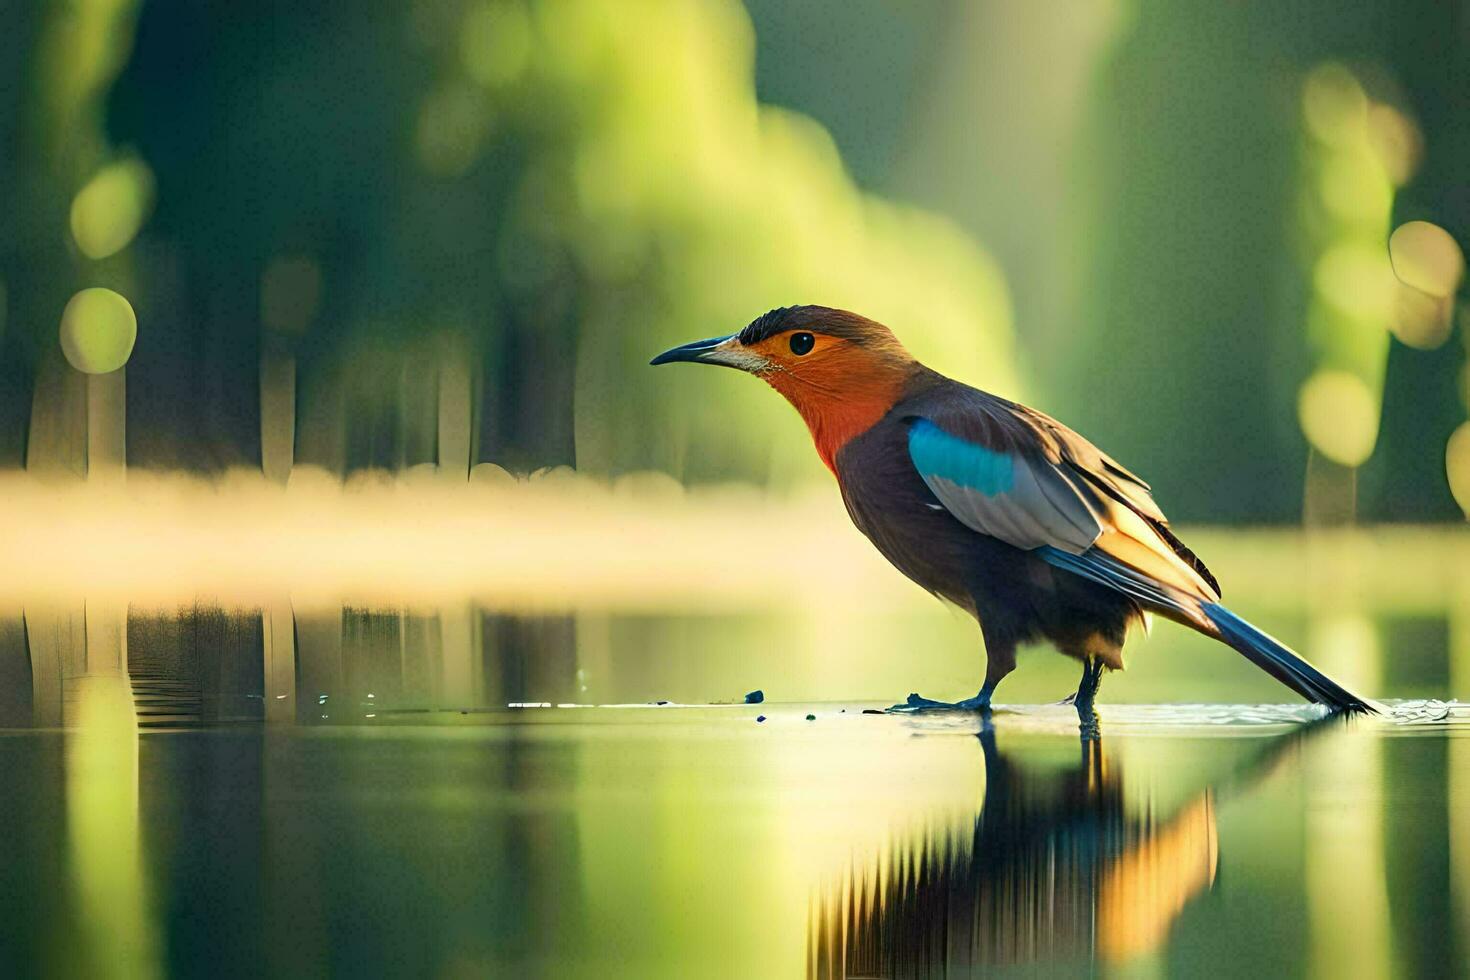 a colorful bird standing on the water with trees in the background